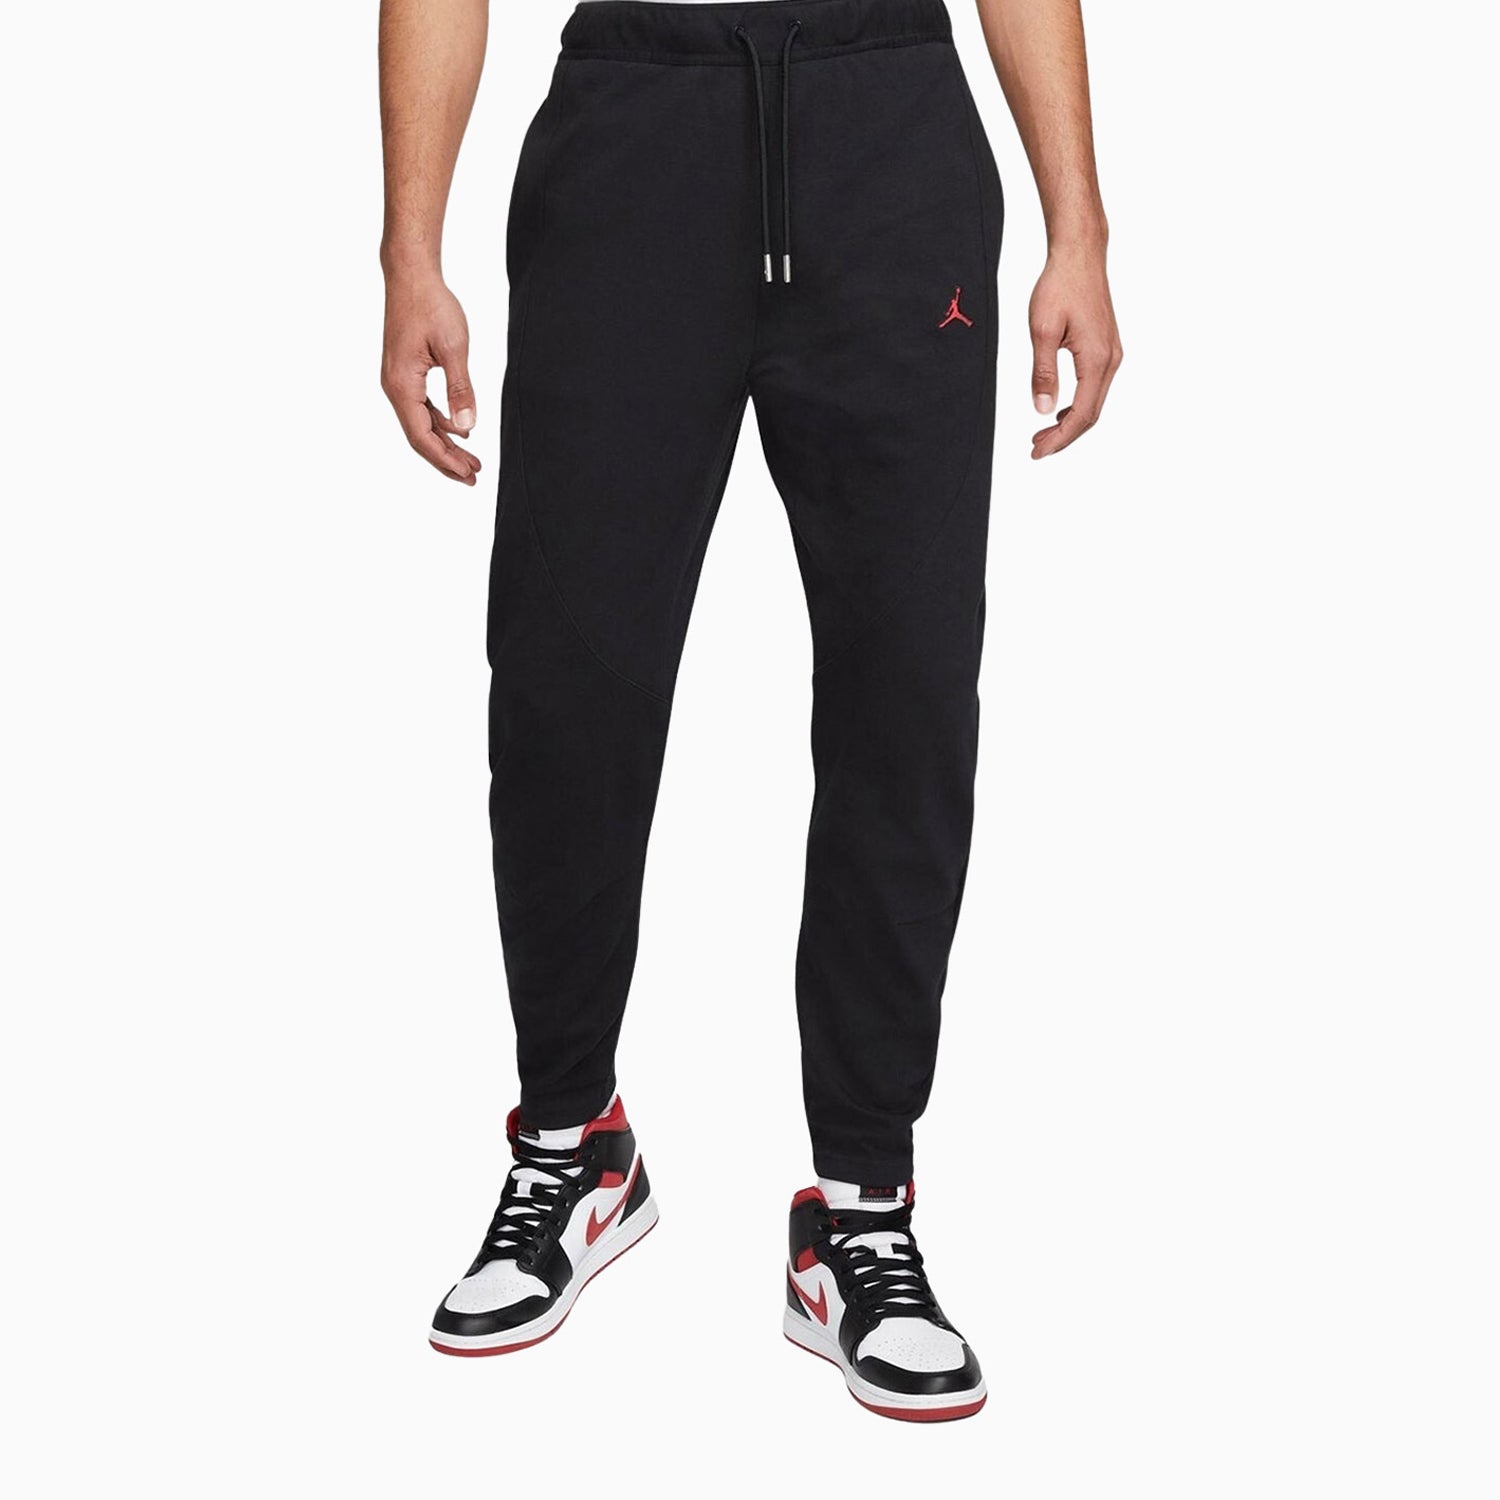 Men's Warm Up Essentials Outfit